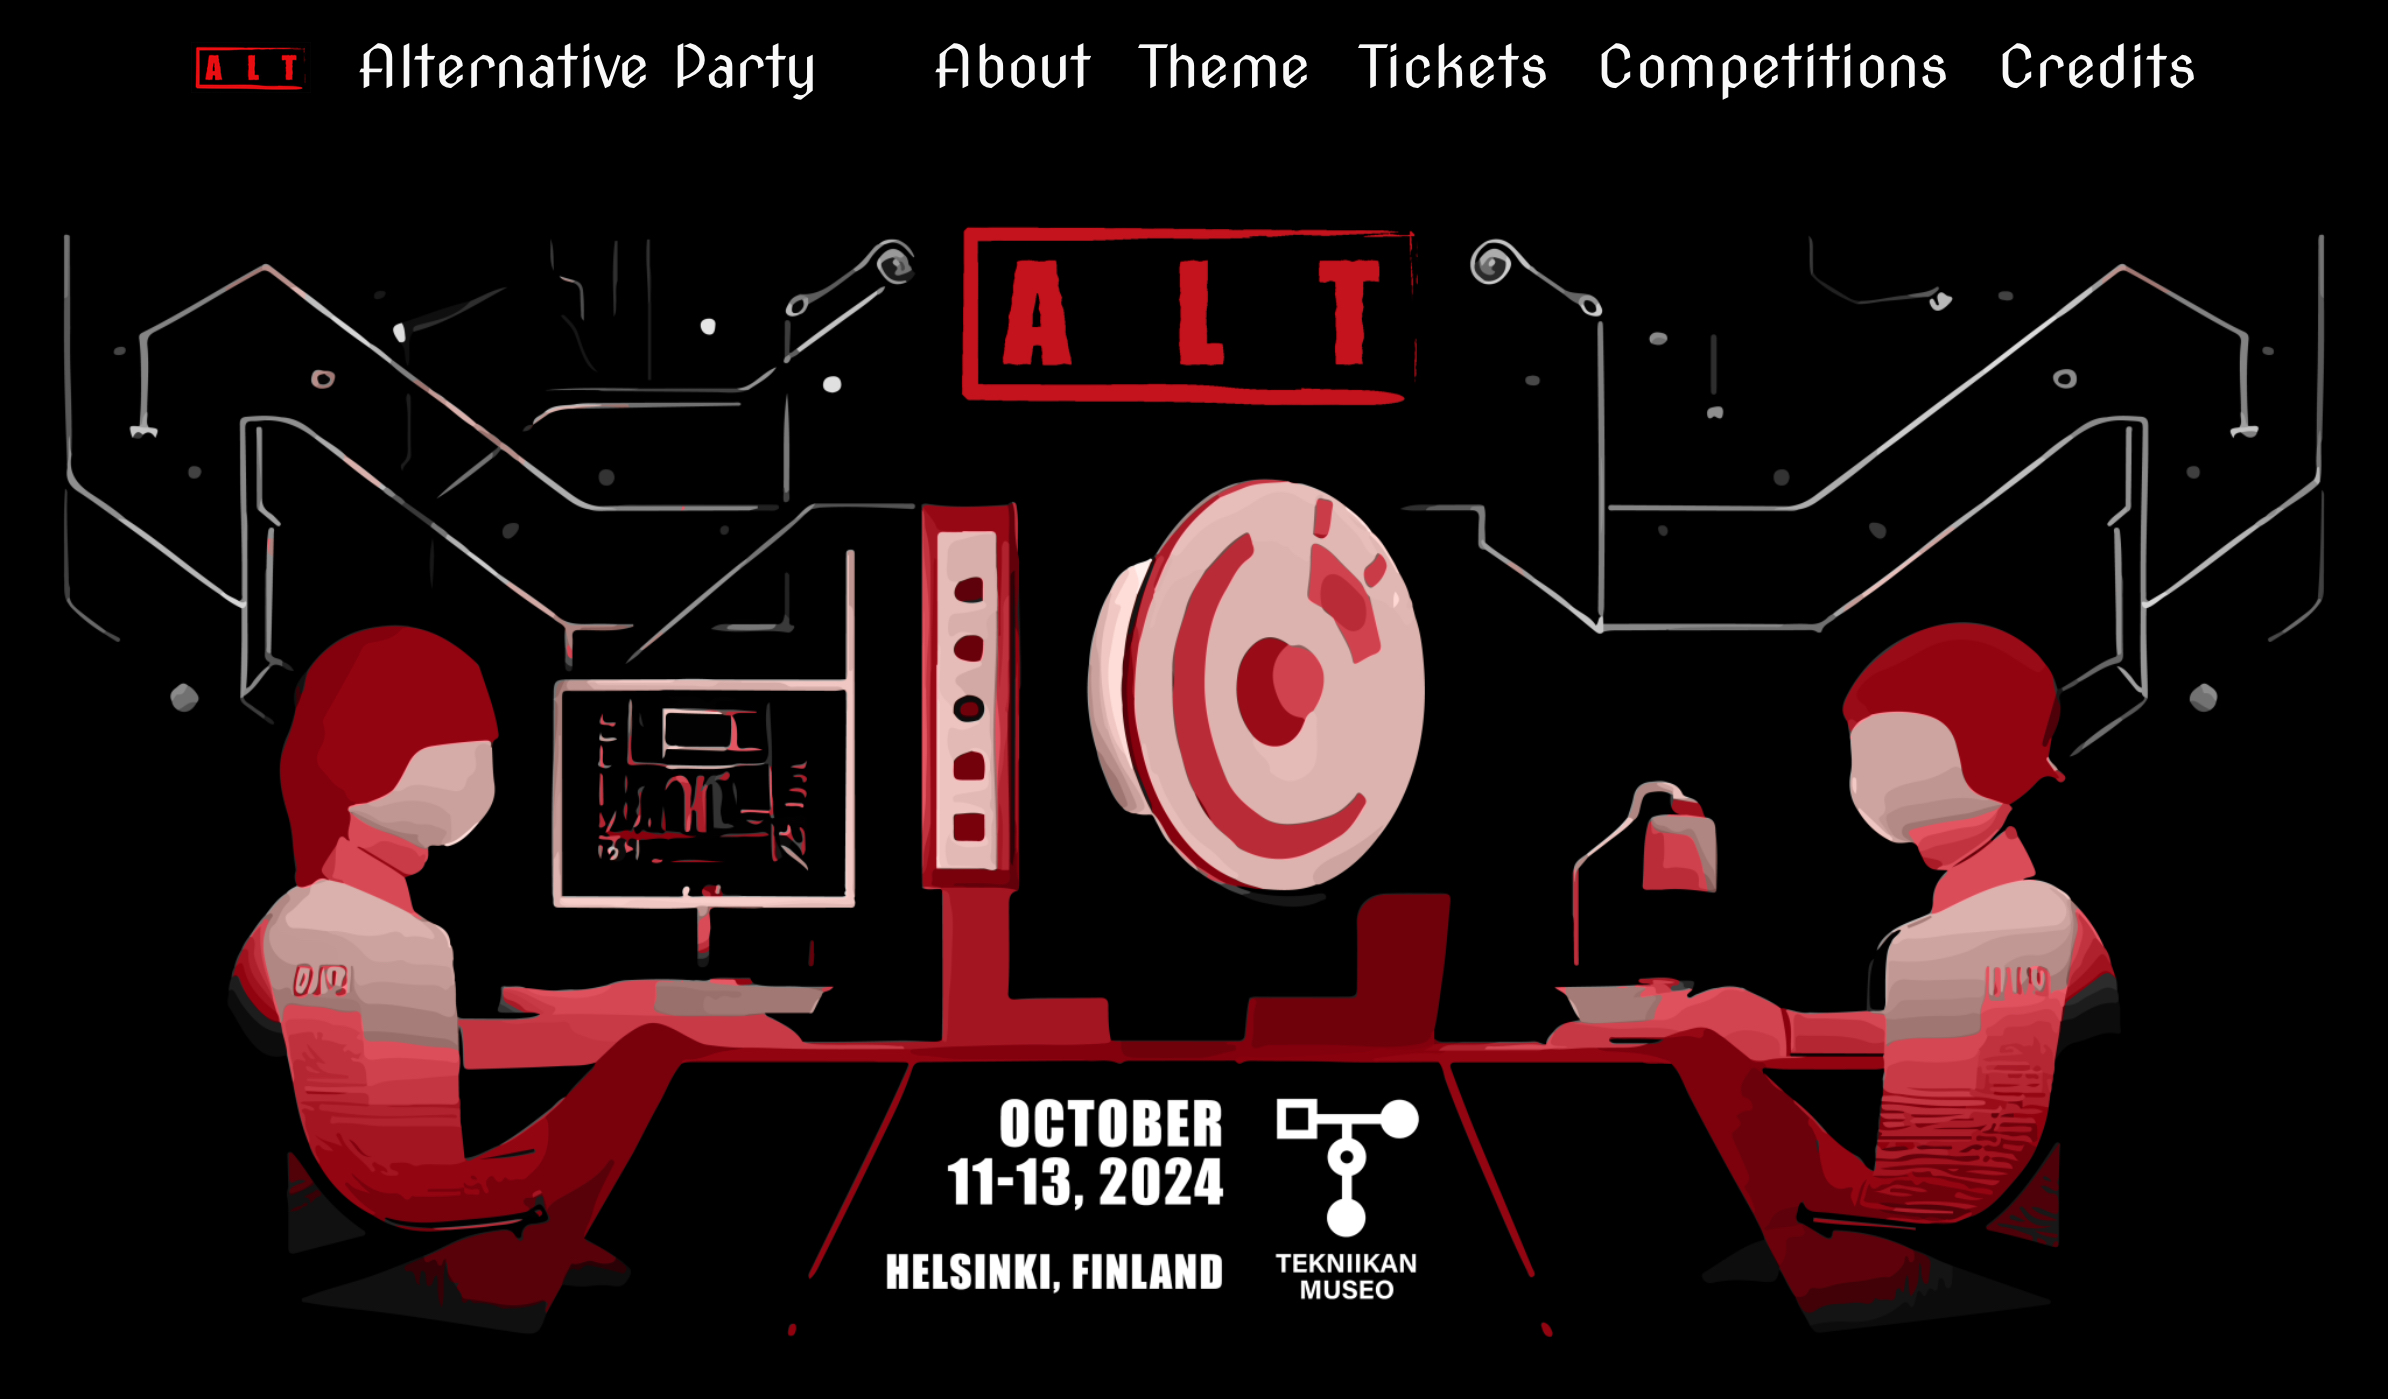 The website of the Altparty